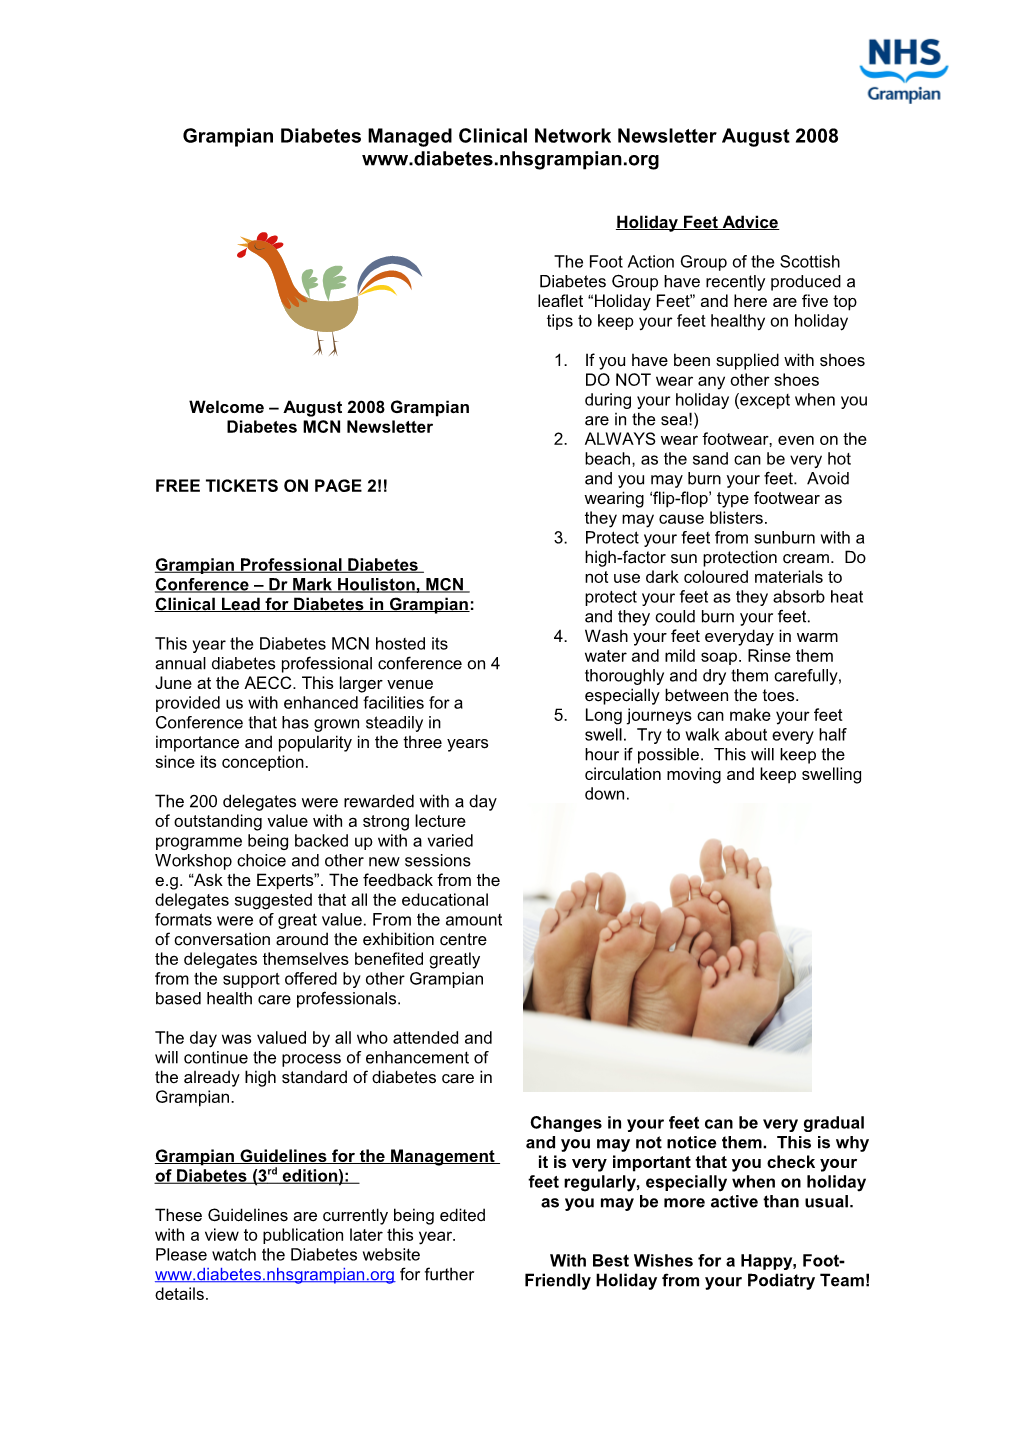 Grampian Diabetes Managed Clinical Network Newsletter February 2006